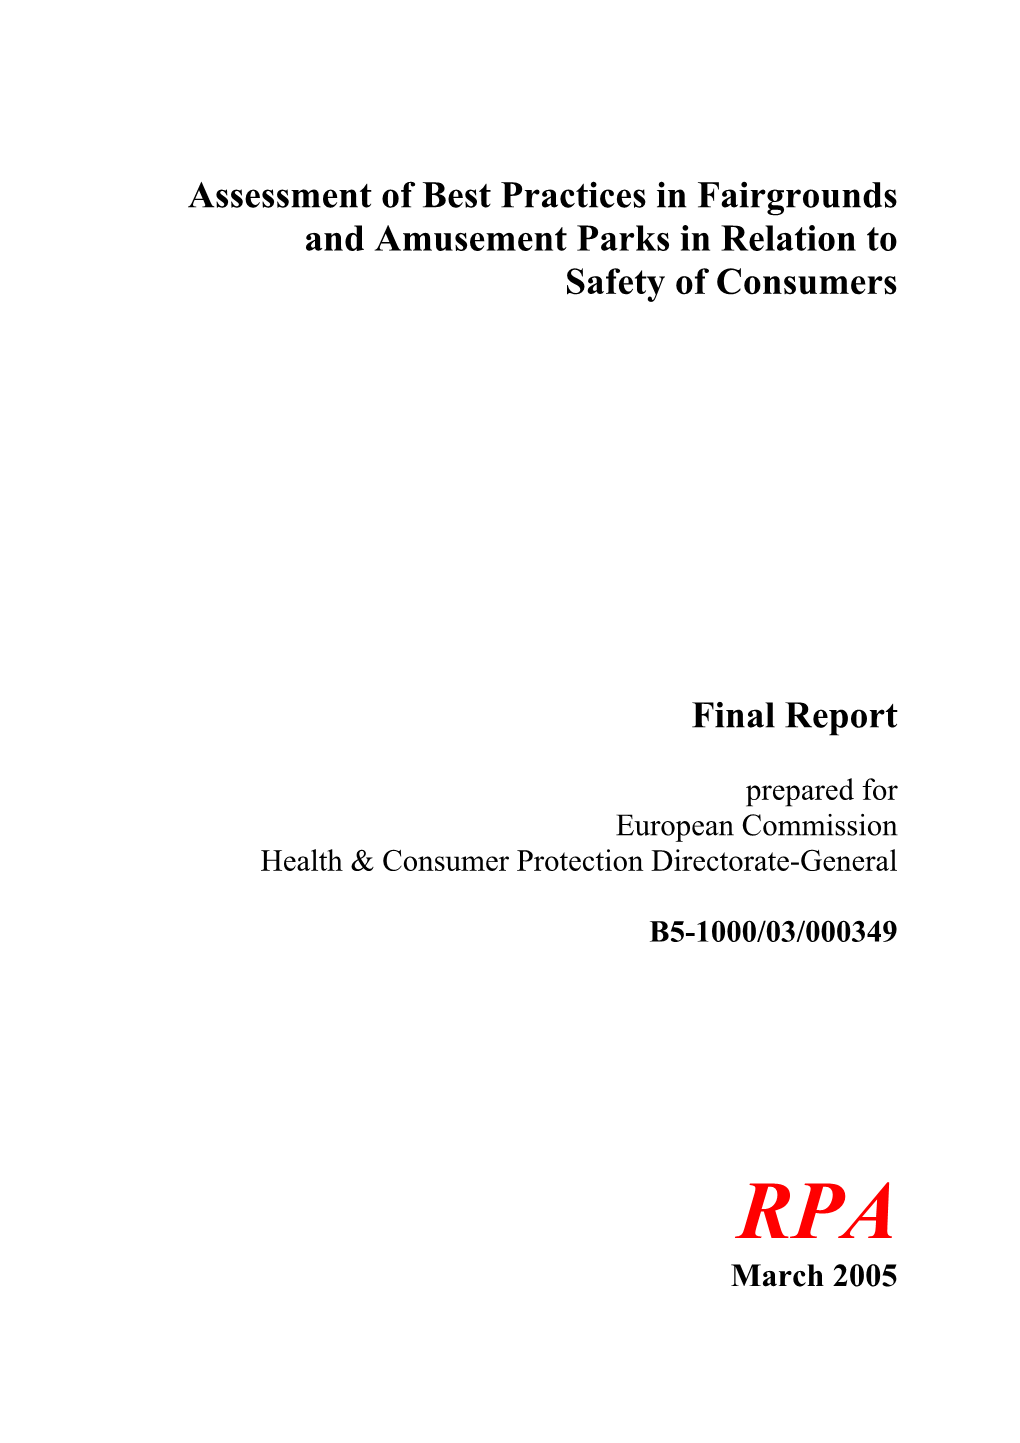 Assessment of Best Practices in Fairgrounds and Amusement Parks in Relation to Safety of Consumers Final Report